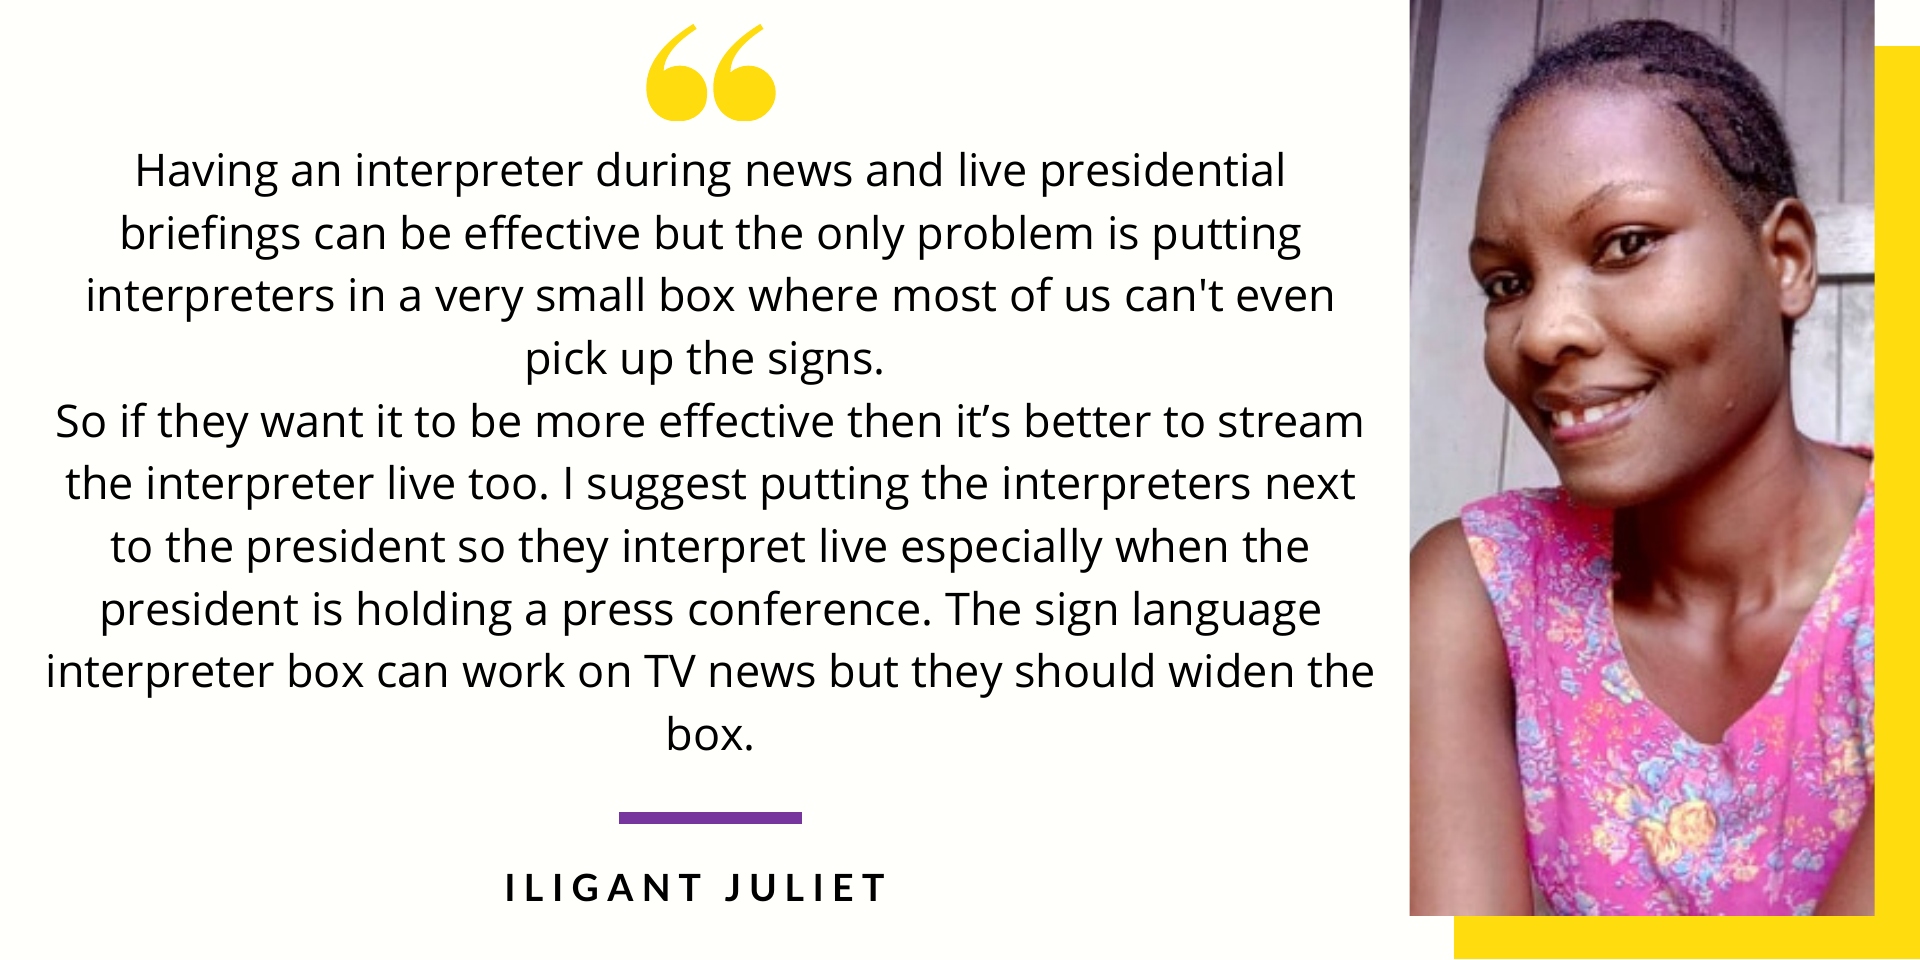 Iligant Juliet says Having an interpreter during news and live presidential briefings can be effective but the only problem is putting interpreters in a very small box where most of us can't even pick up the signs. So if they want it to be more effective then it’s better to stream the interpreter live too. I suggest putting the interpreters next to the president so they interprete live especially when the president is holding a press conference. The sign language interpreter box can work on TV news but they should widen the box.